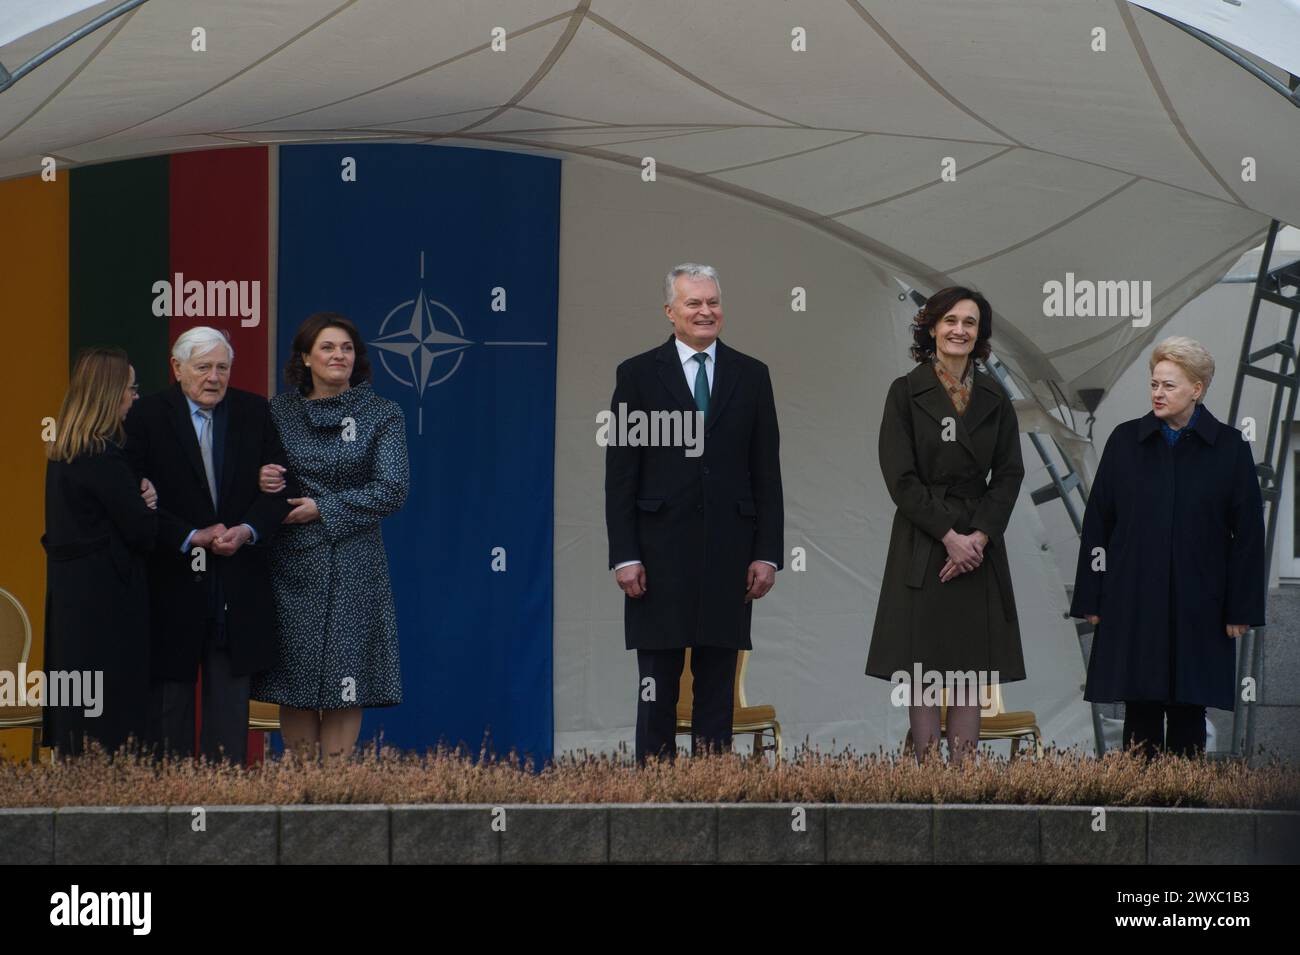 President of Lithuania Gitanas Nauseda (center), first lady Diana Diana Nausediene (3rd left), speaker of the Lithuanian Seimas Viktorija Cmilyte-Nielsen (2nd right) and former Lithuanian presidents Valdas Adamkus (2nd left) and Dalia Grybauskaite (1st right) during the 20th anniversary of Lithuania's NATO membership celebration. Solemn ceremony to mark Lithuania's NATO membership 20th anniversary took place at the S. Daukantas Square, in front of the Presidential Palace in Vilnius, on March 29, 2024. 20 years ago Lithuania became a full-fledged member of NATO. Stock Photo